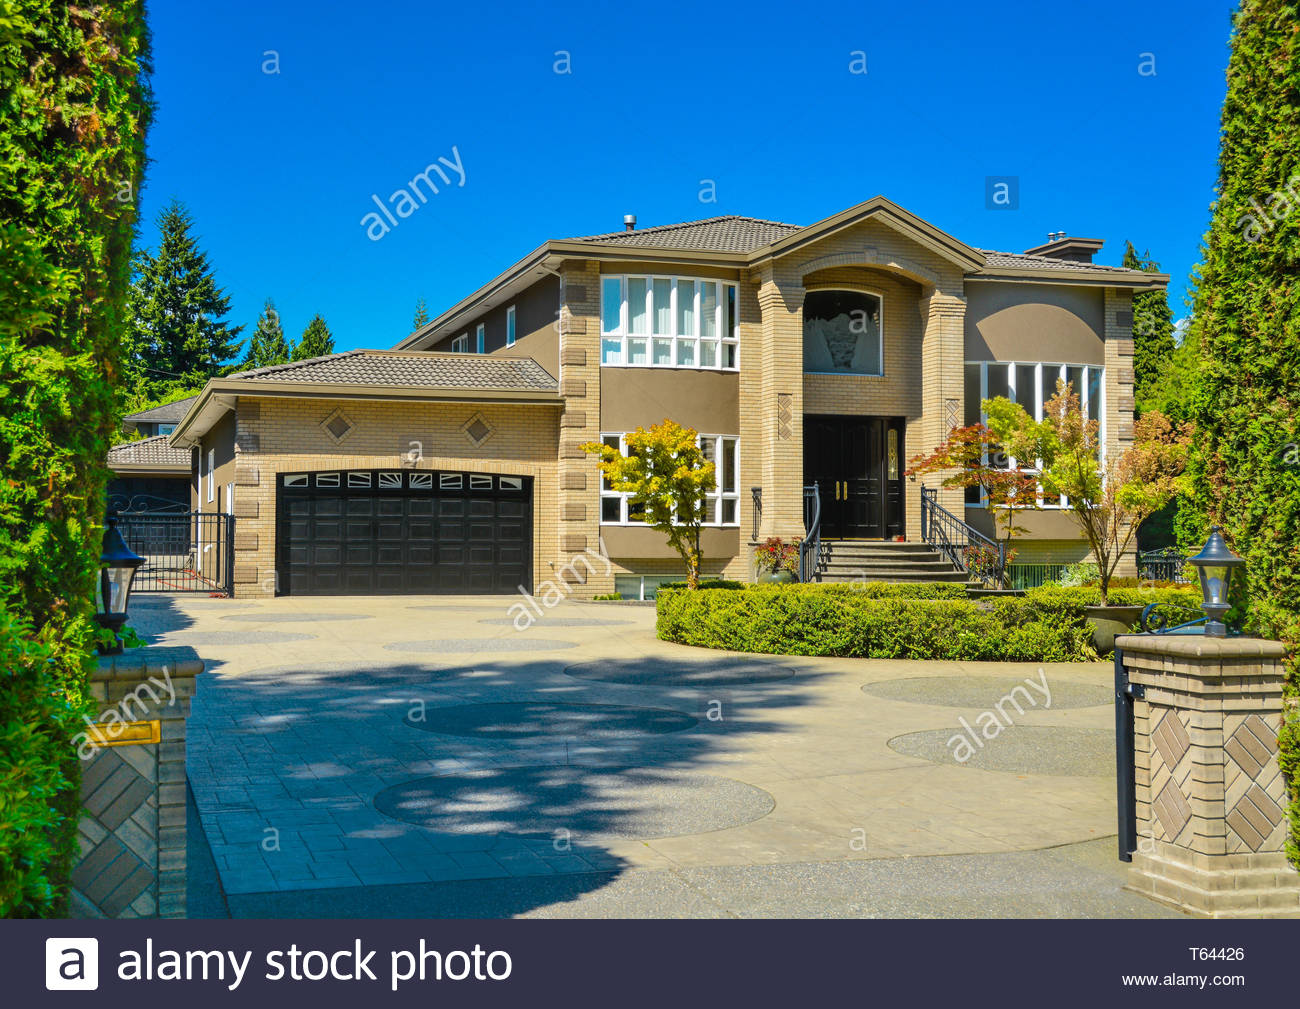 Front Yard Of Luxury Family House With Paved Driveway On Blue Sky